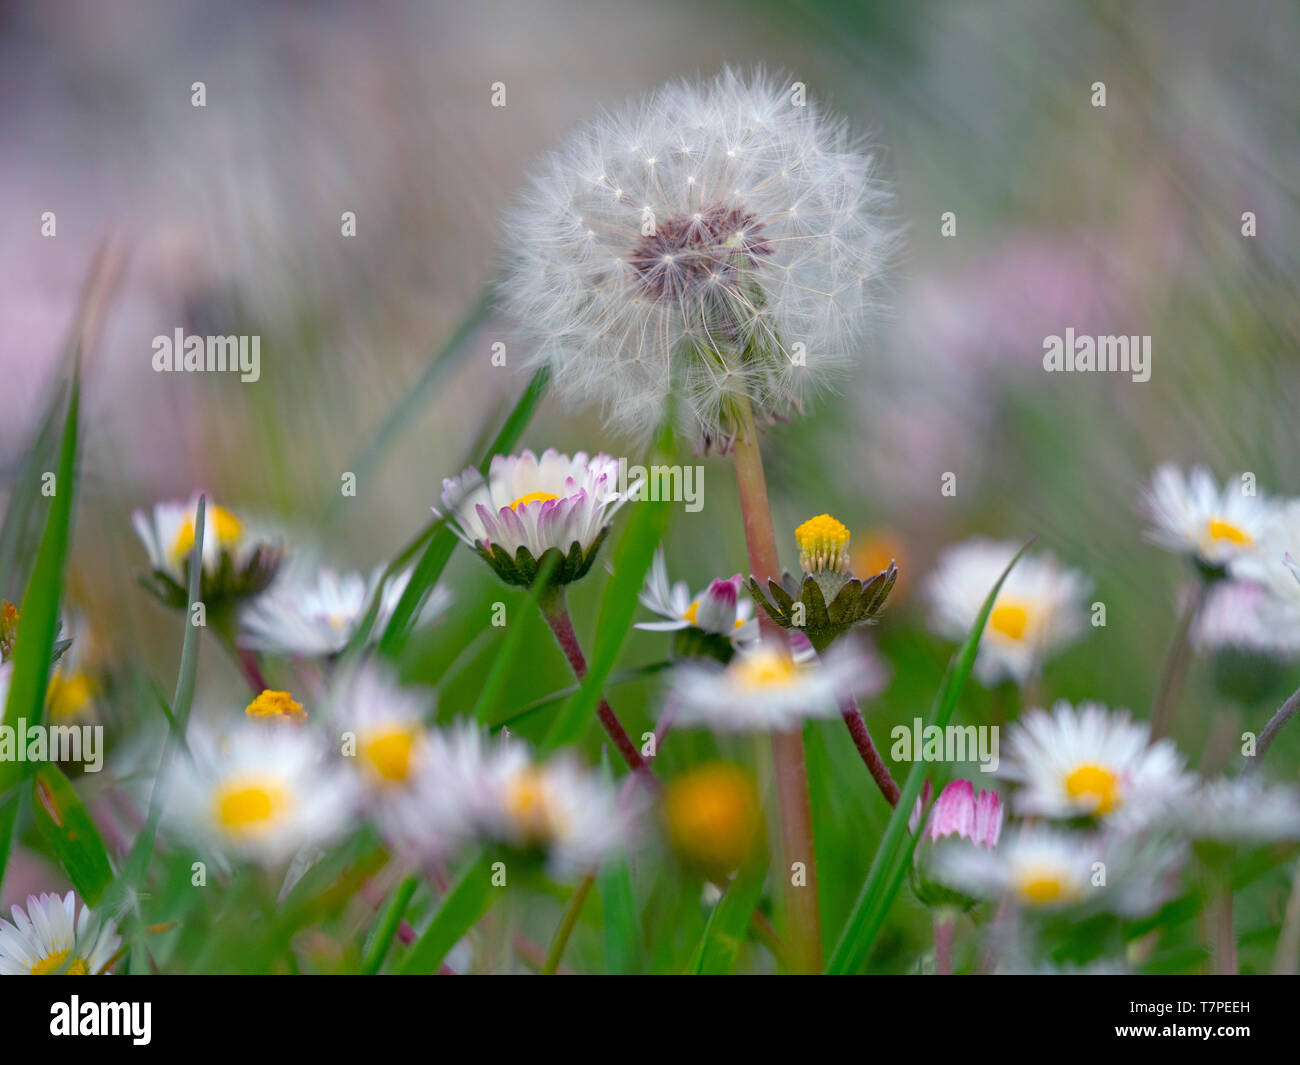 Dandelion Taxaxacum officinale seed heads and flowers with garden daises Stock Photo